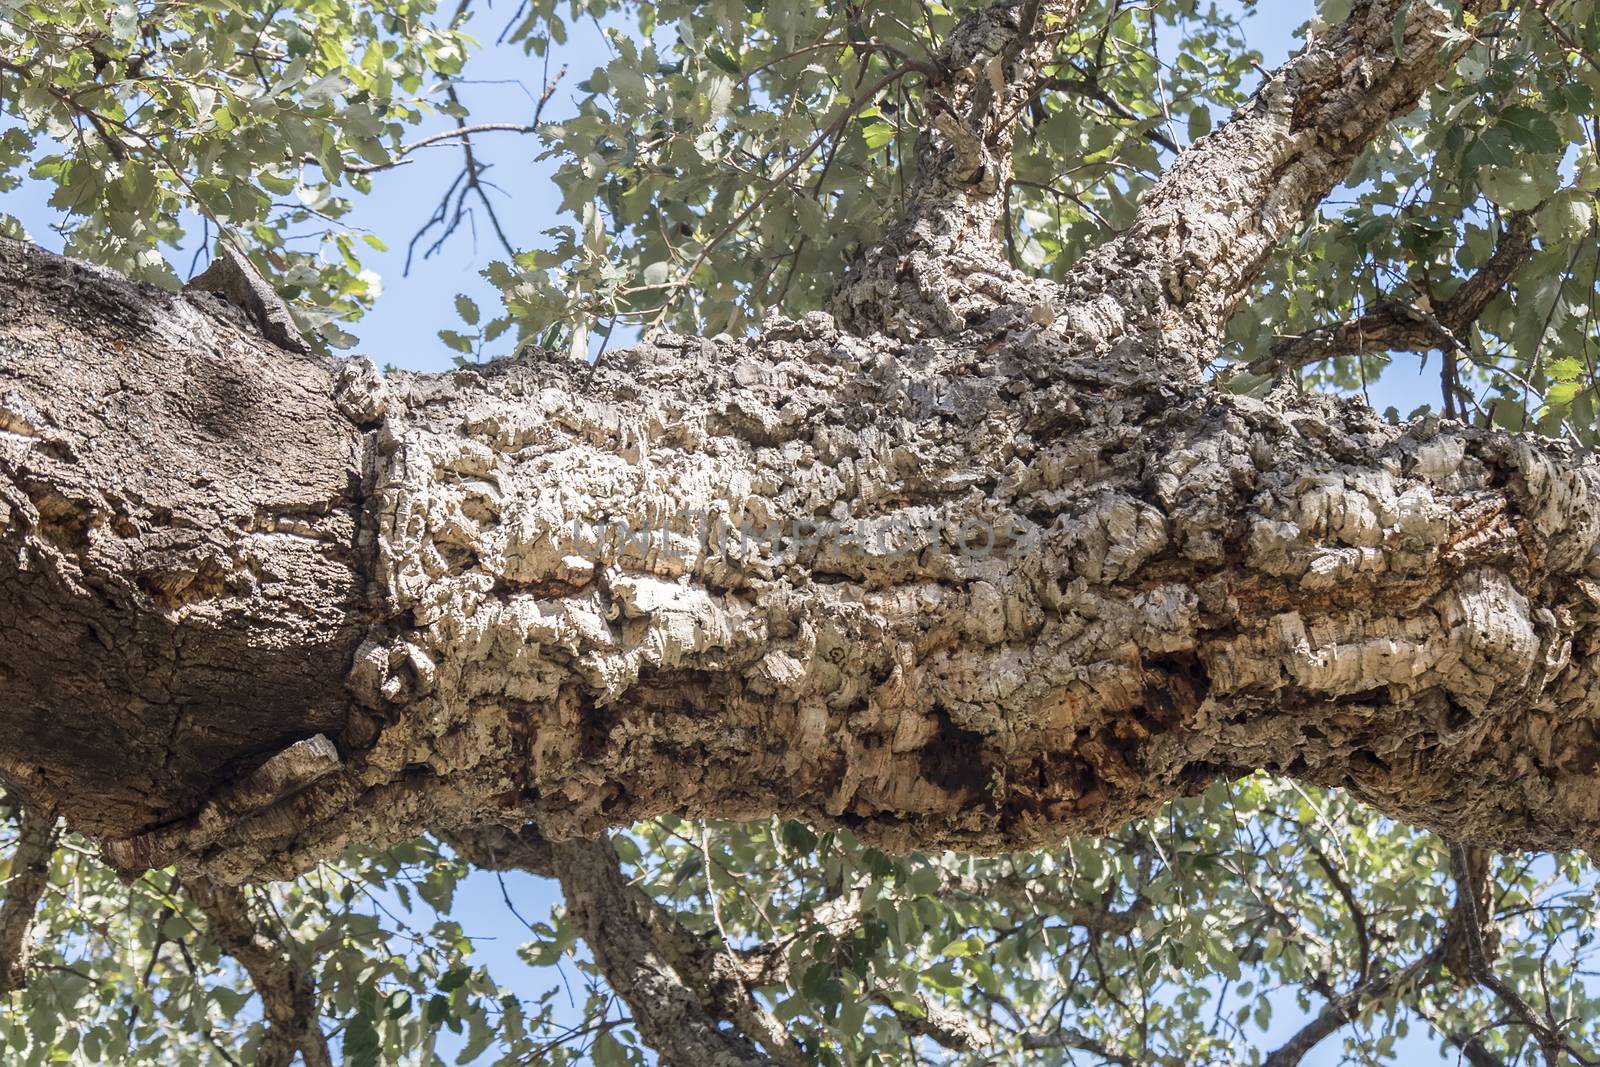 Extraction of cork, naked trunk, cork tree